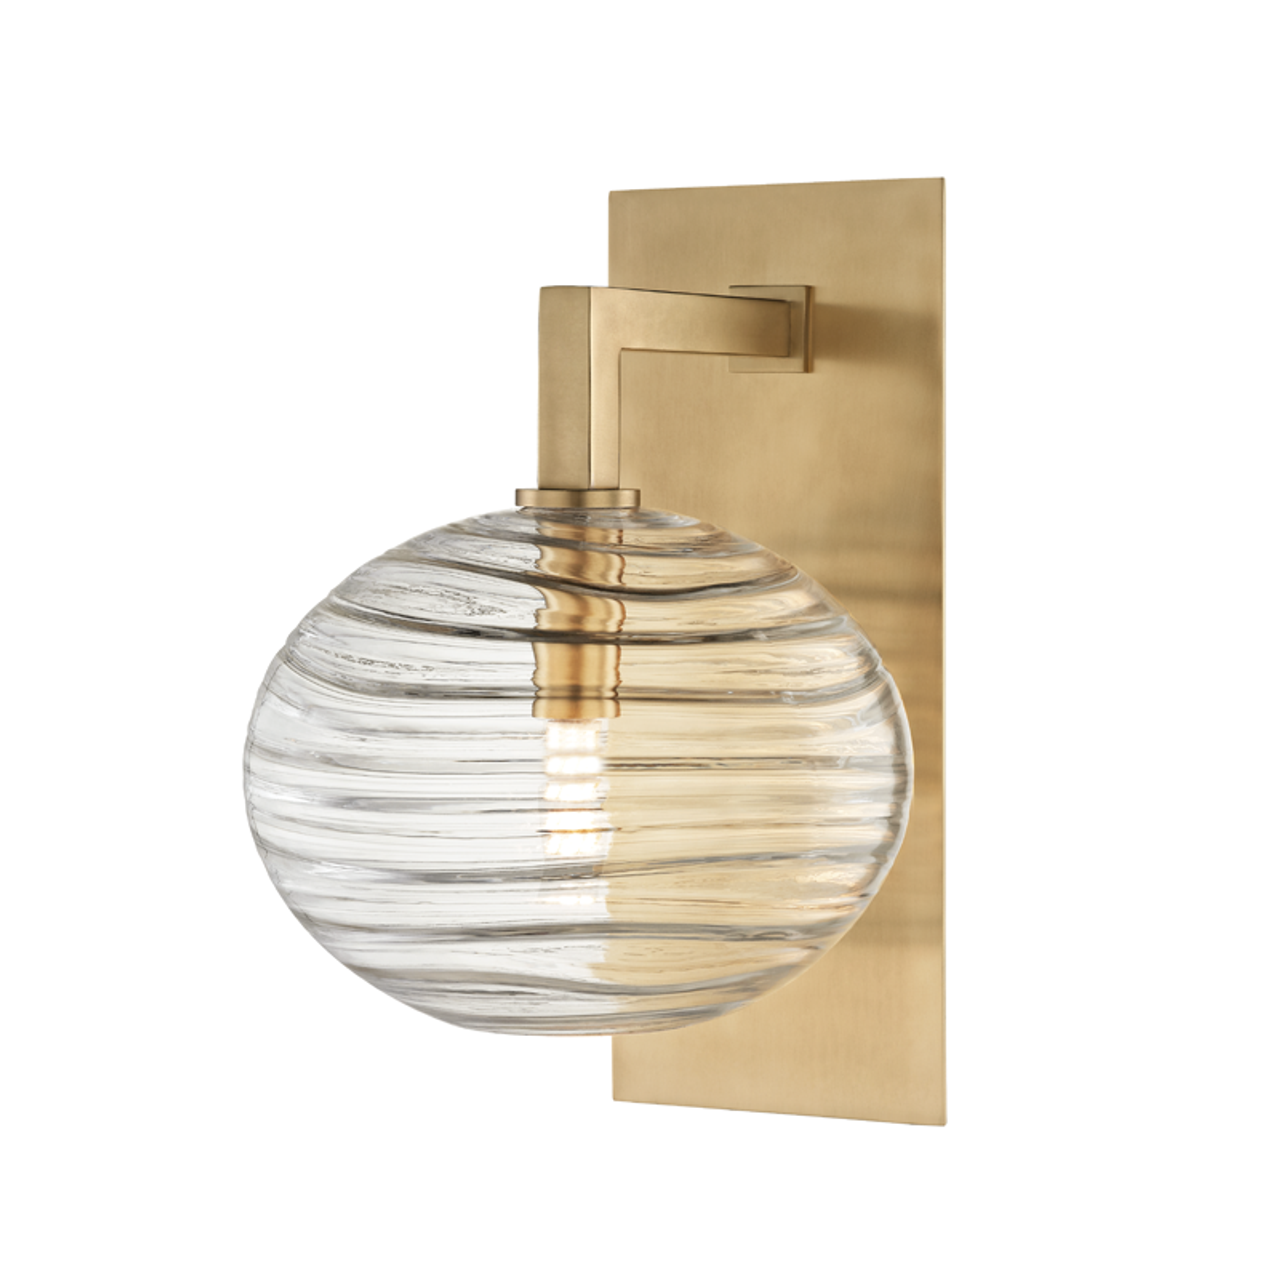 Hudson Valley Lighting Breton Light Wall Sconce In Aged Brass 2400-AGB